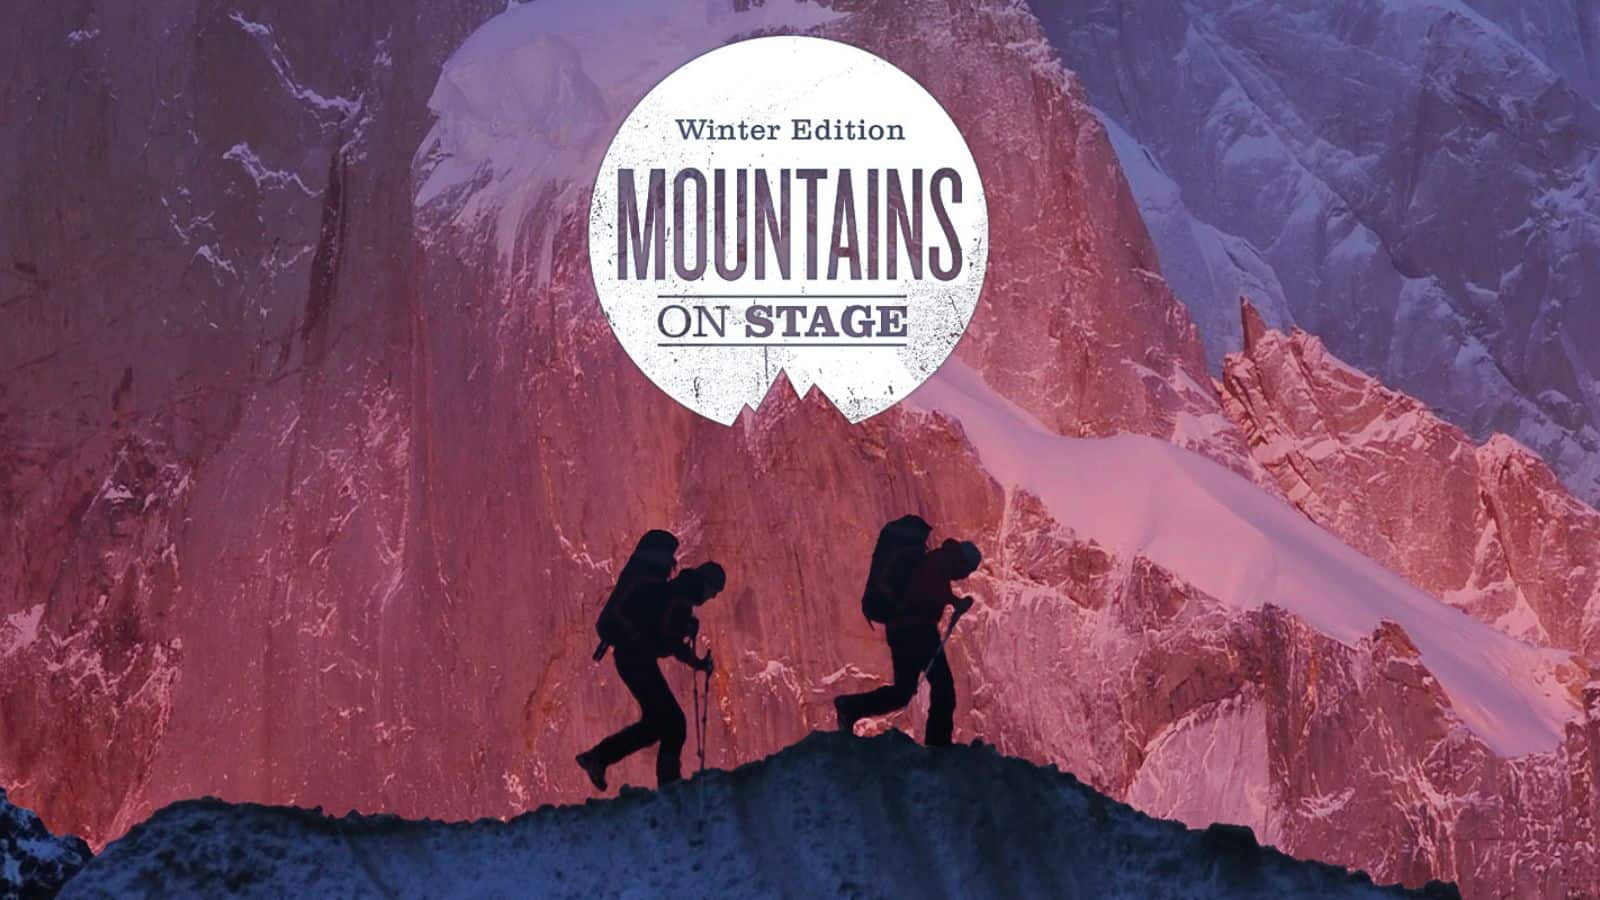 Mountains on Stage: Winter Edition 2023